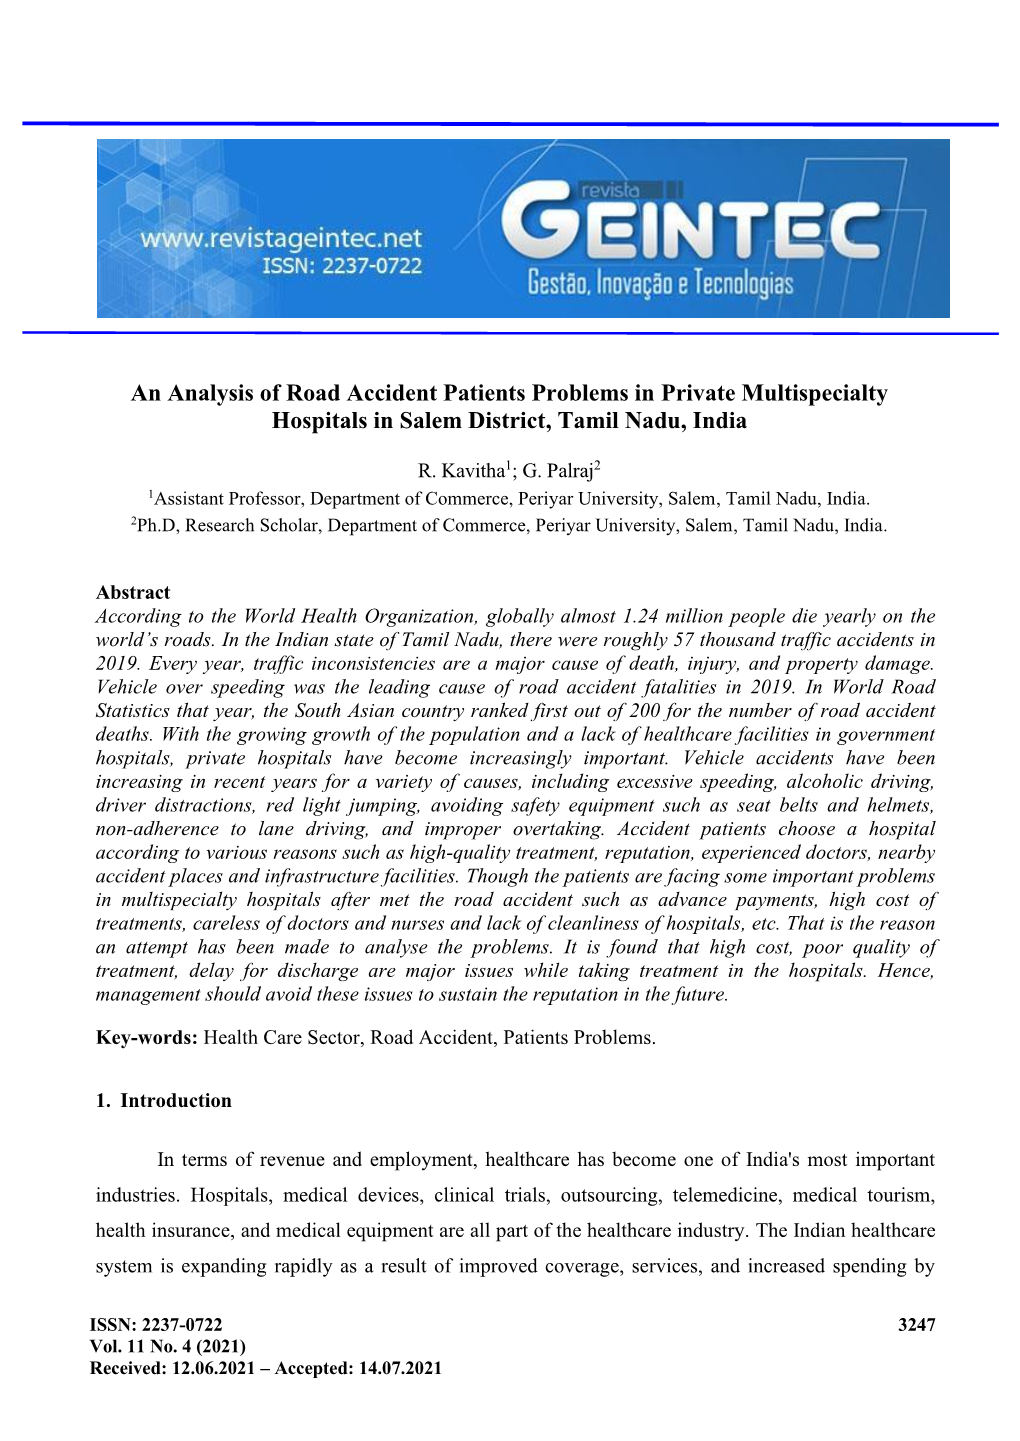 An Analysis of Road Accident Patients Problems in Private Multispecialty Hospitals in Salem District, Tamil Nadu, India